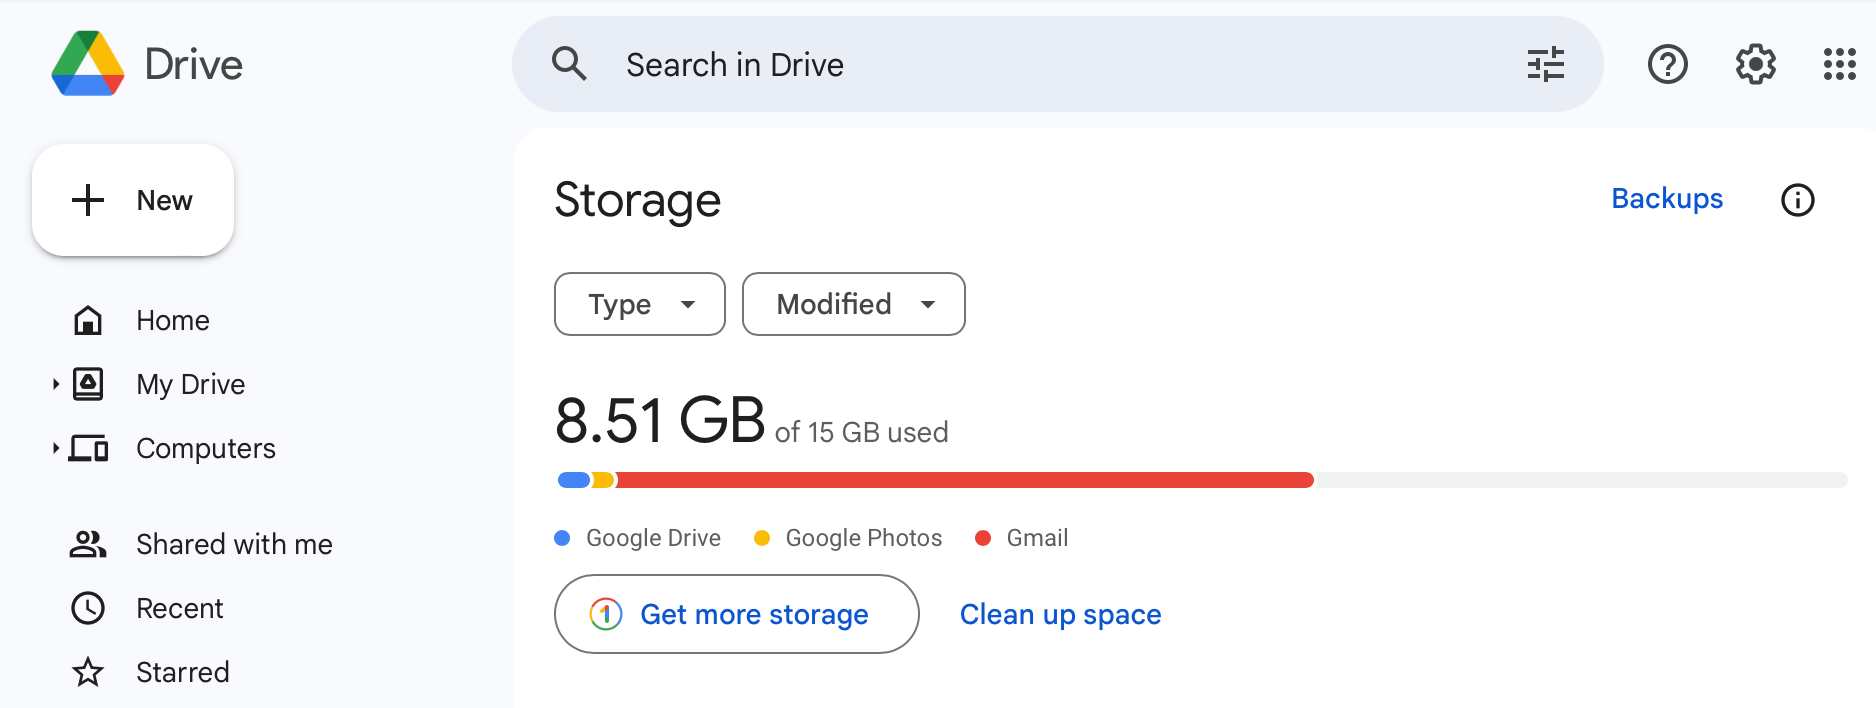 Google Drive available storage remaining.